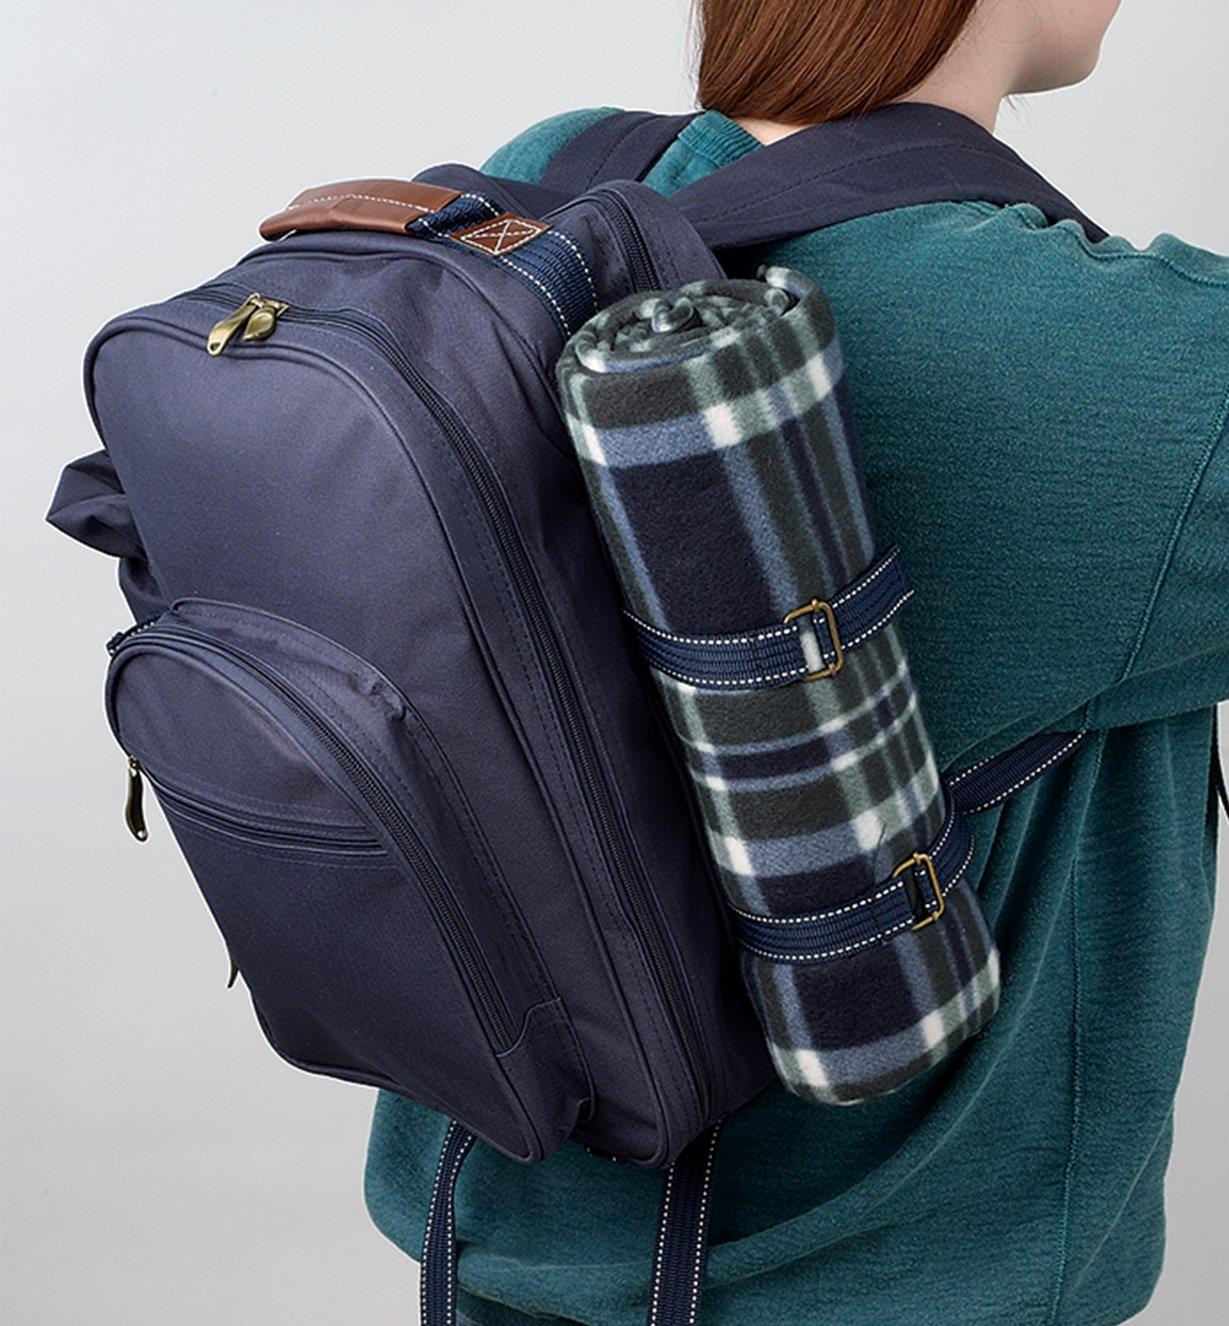 A woman carrying the Deluxe Picnic Backpack on her back